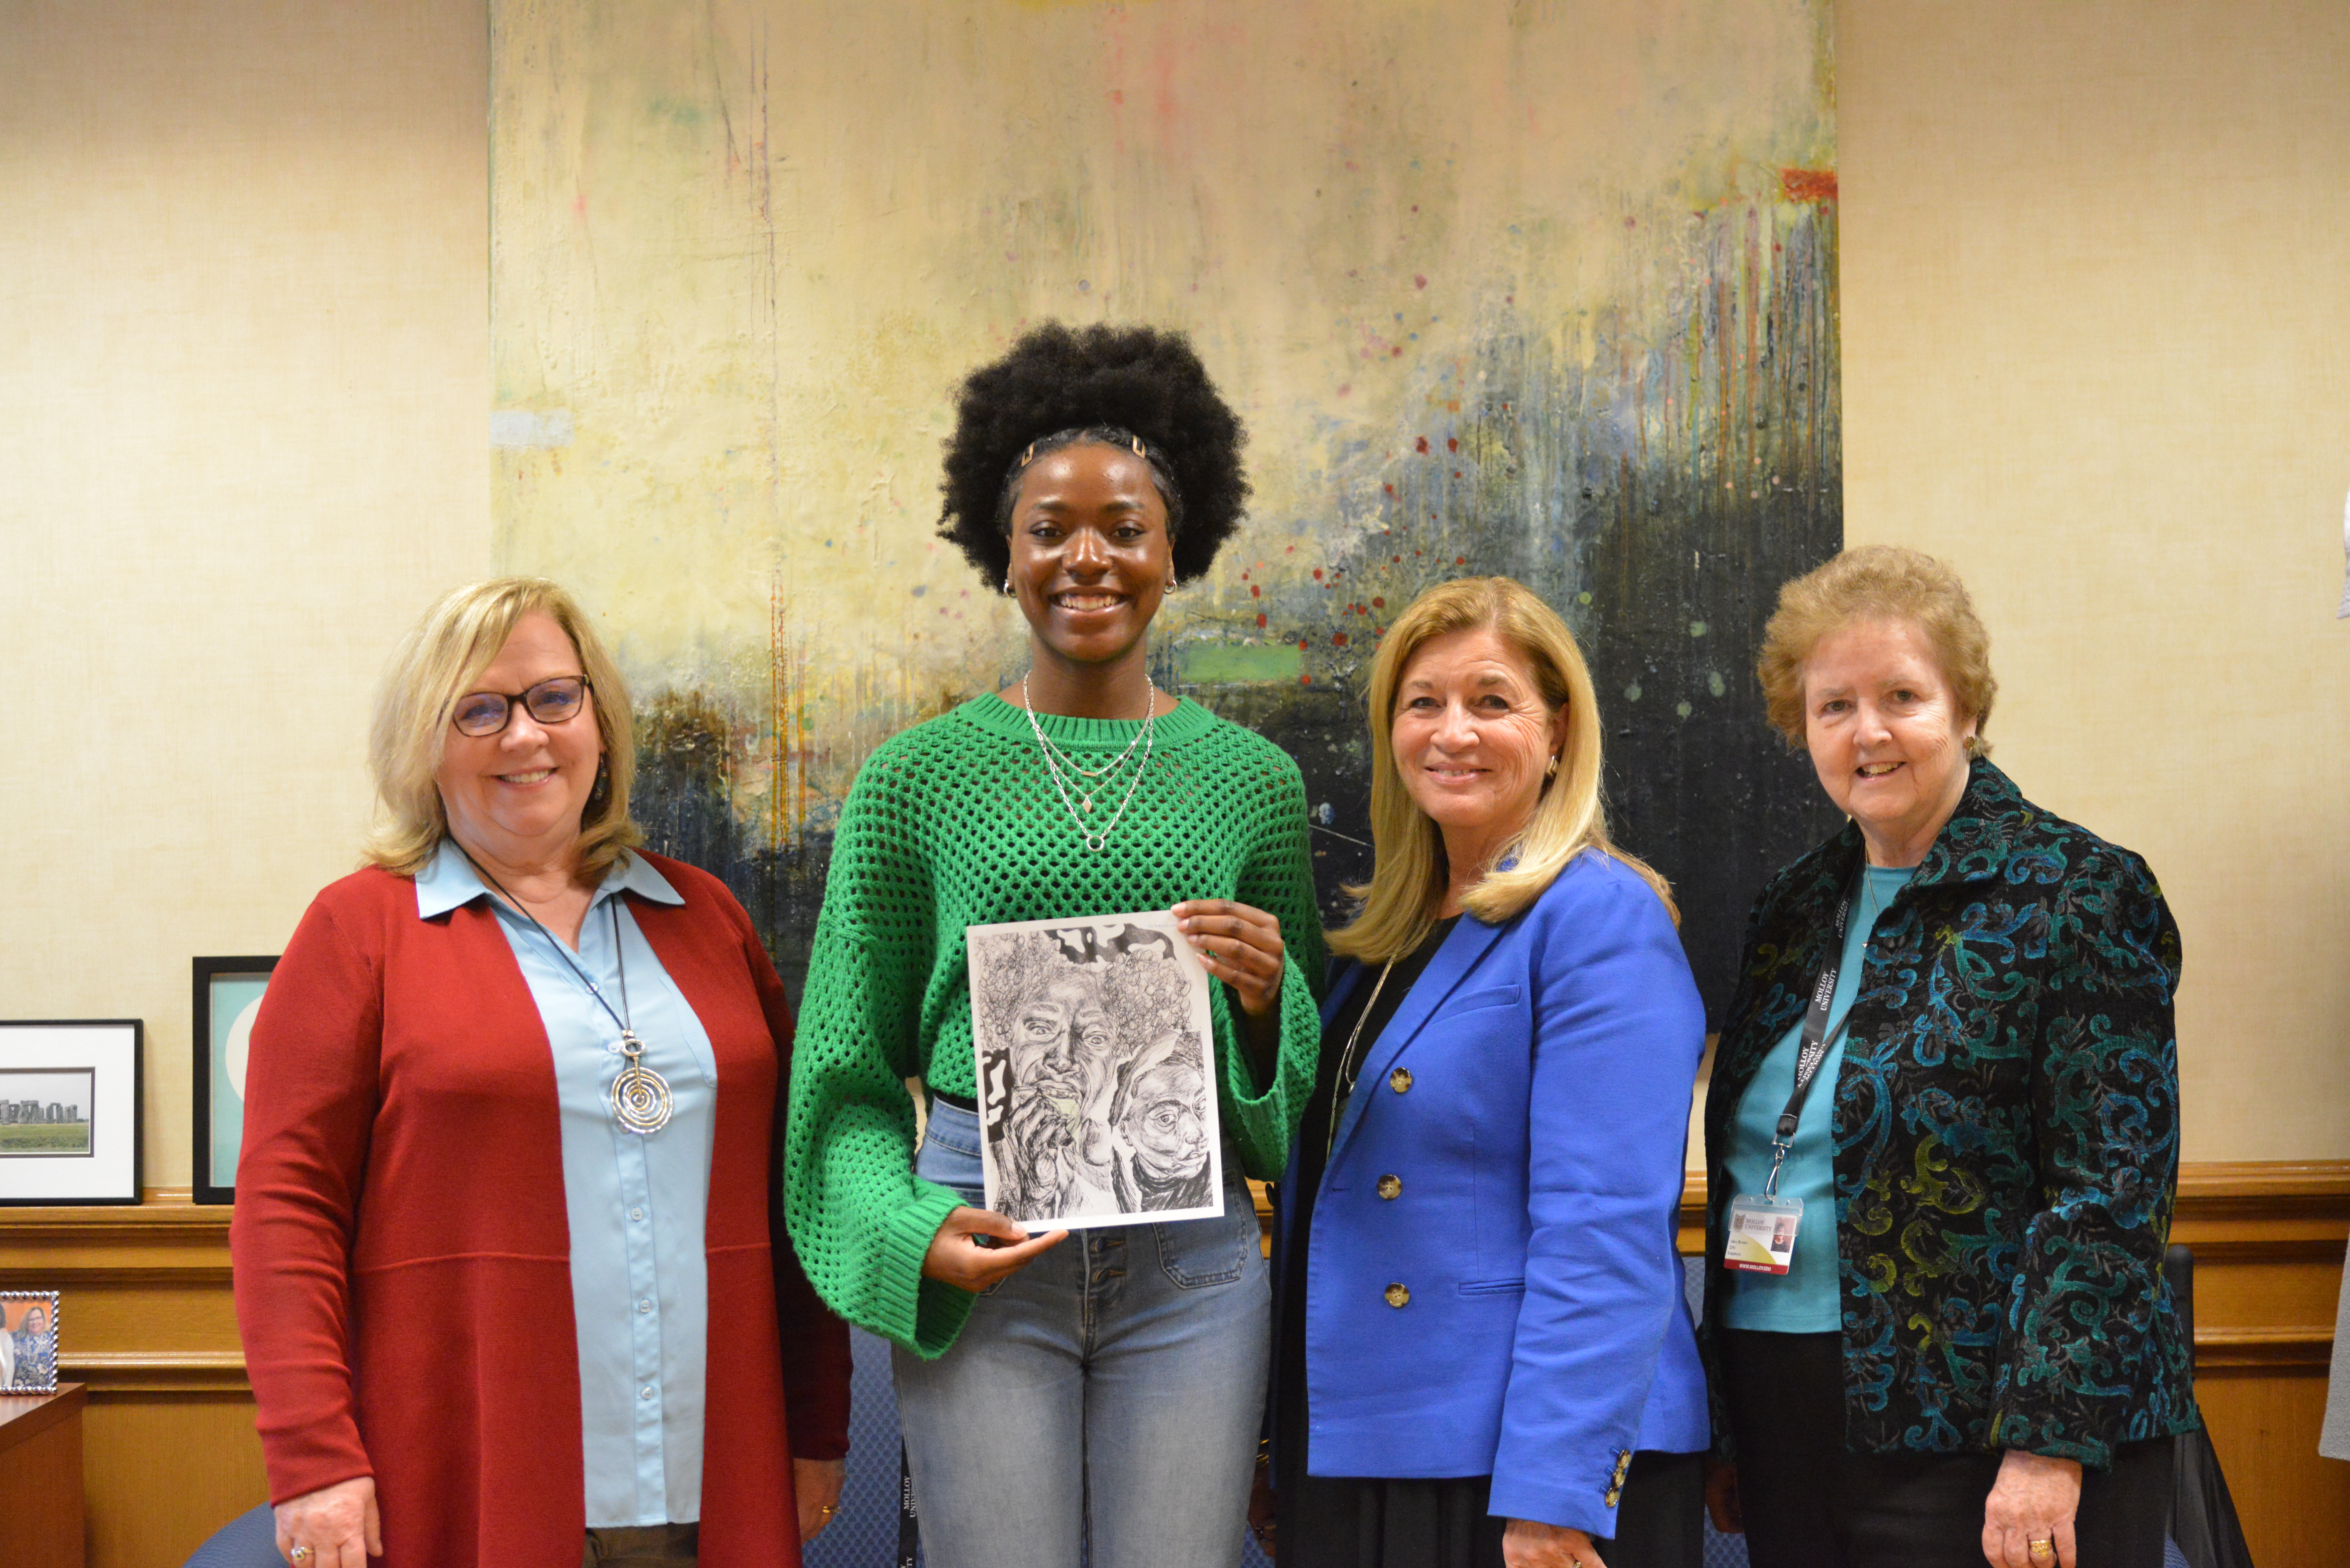 A group picture of Emma Quinn holding her artwork standing next to provost Michelle Piskulich, associate provost Barbara T. Schidmt. Ph. D, and Chairperson of the Common Reading Committee, Alice Bryce, O.P., D.A., 